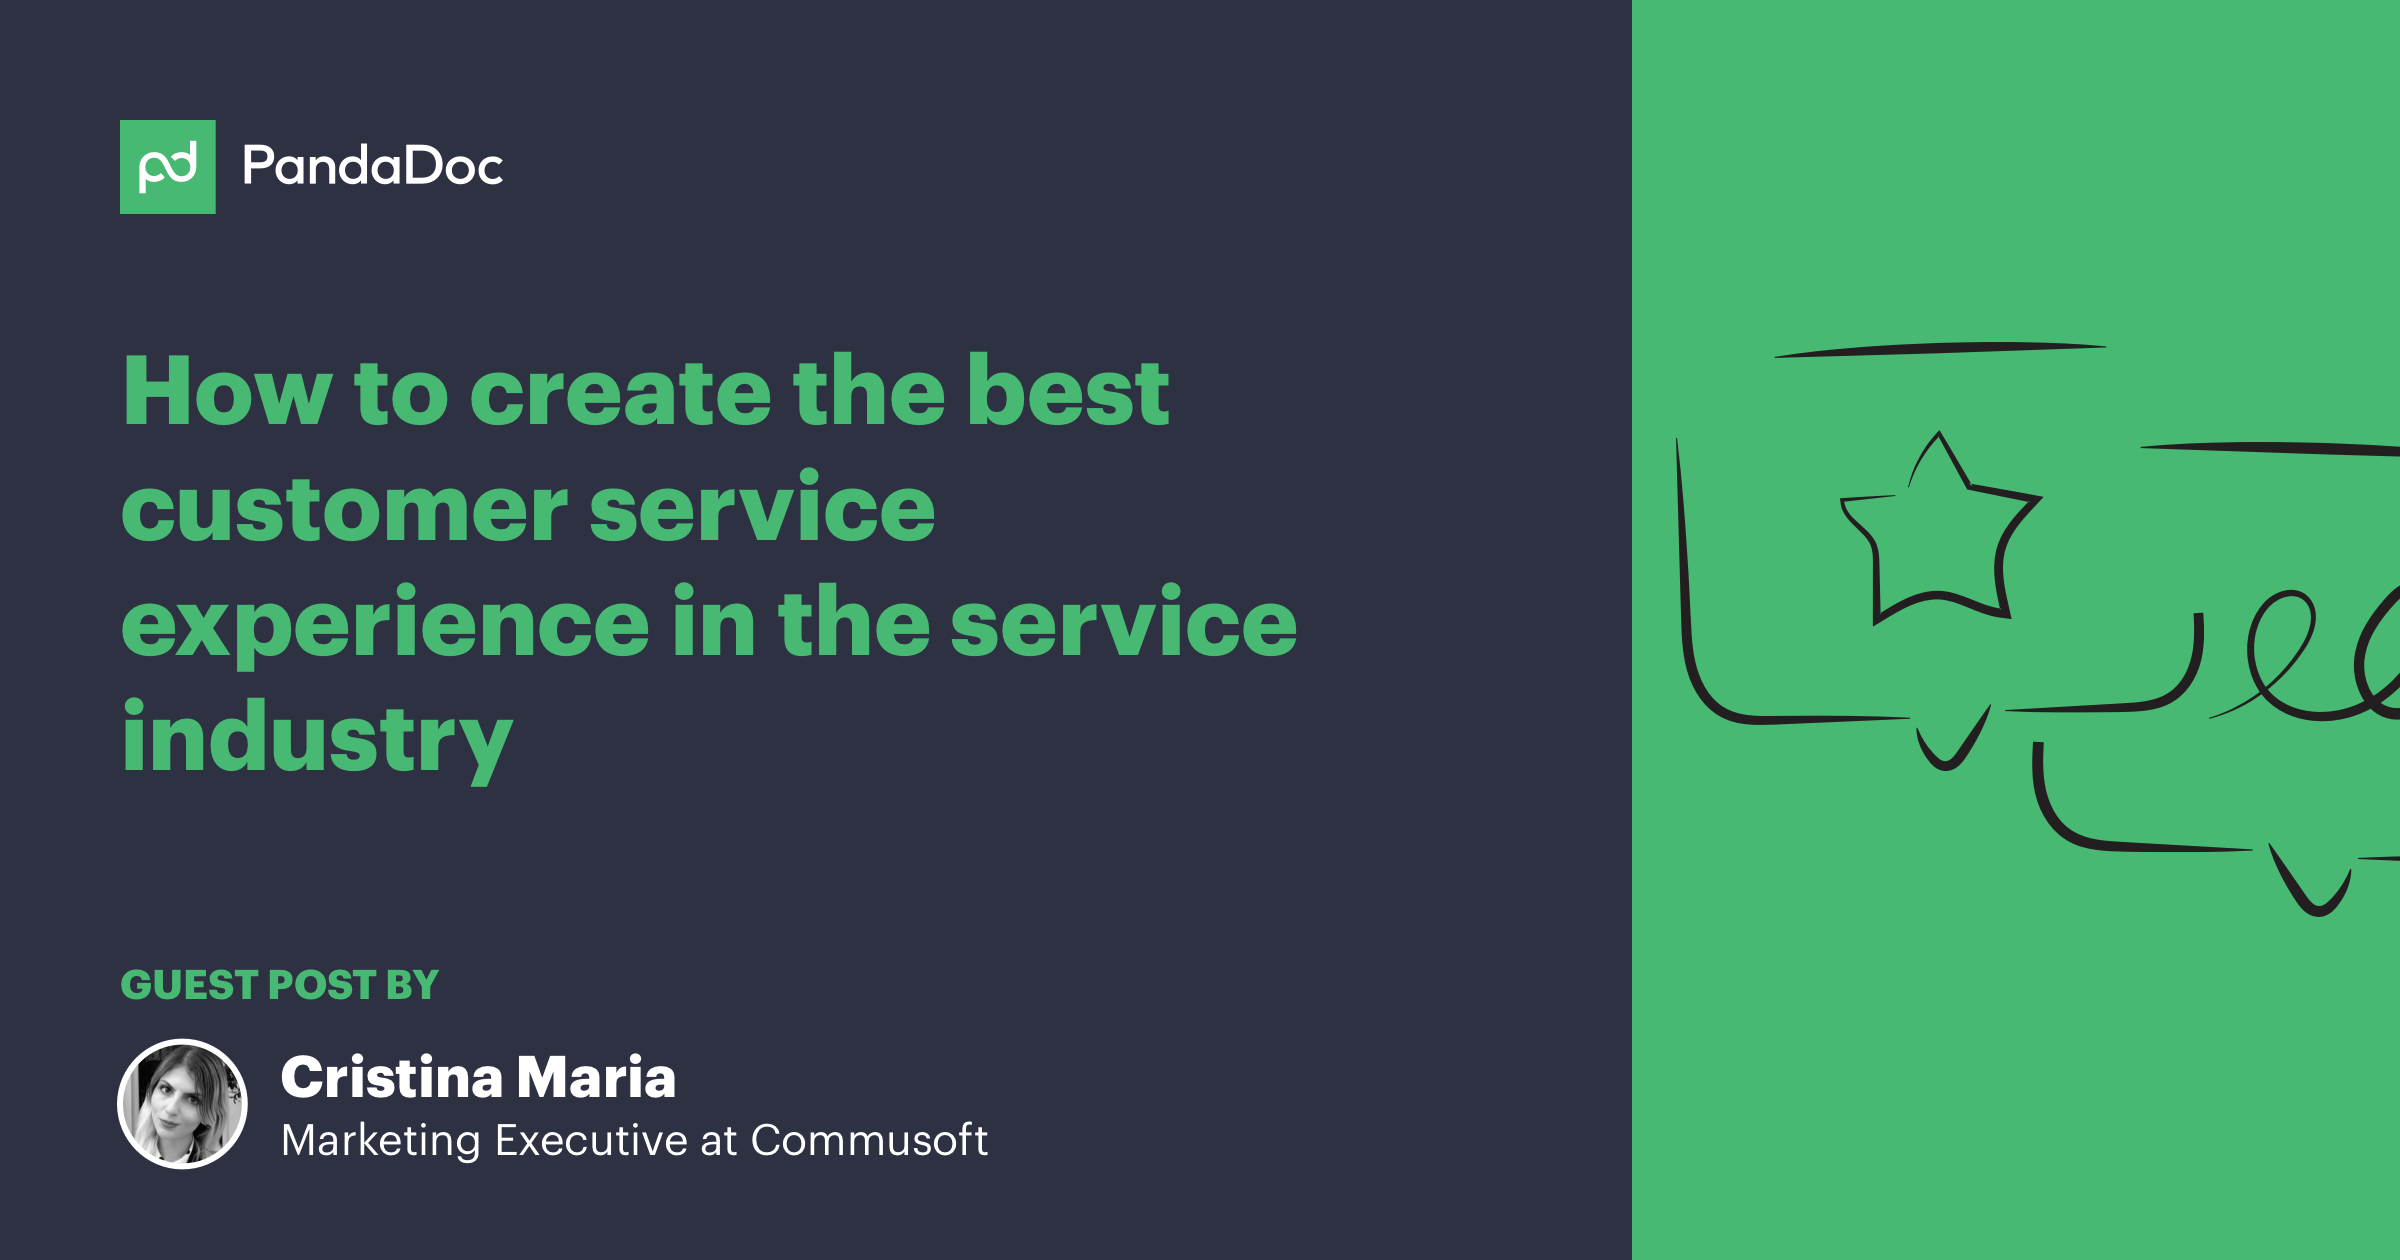 How to create the best customer service experience in the service industry